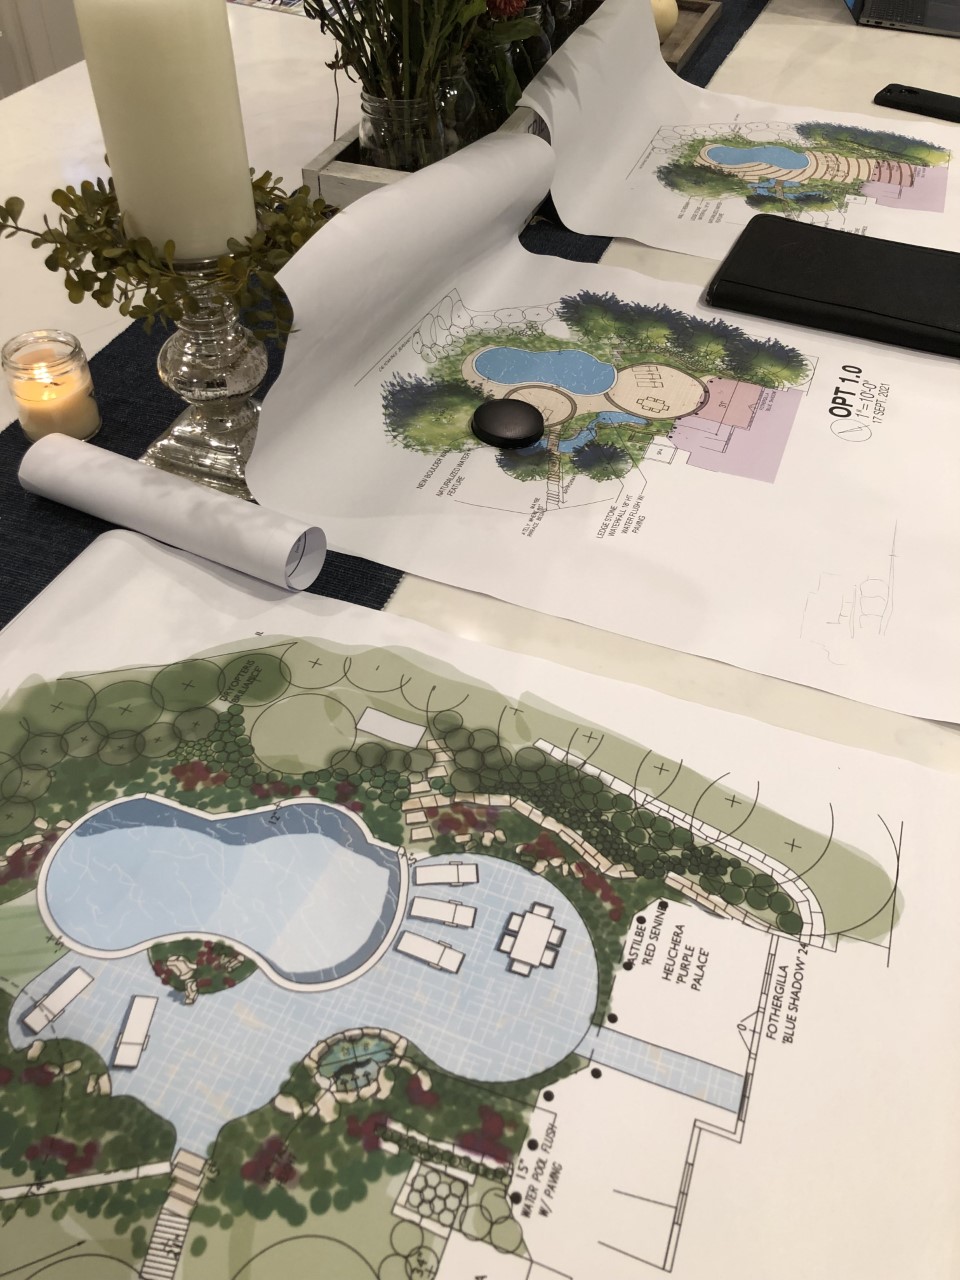 We had a great design presentation this week!  Our client likes option number three the best but wants us to integrate the sundeck from design number one, elevate it, and add a natural stone wall with flowing water features and vegetation so he feels like he is relaxing in a mountain oasis!  We can't wait to finalize the design revisions and get this backyard pool renovation underway! www.gardenartisansllc.com